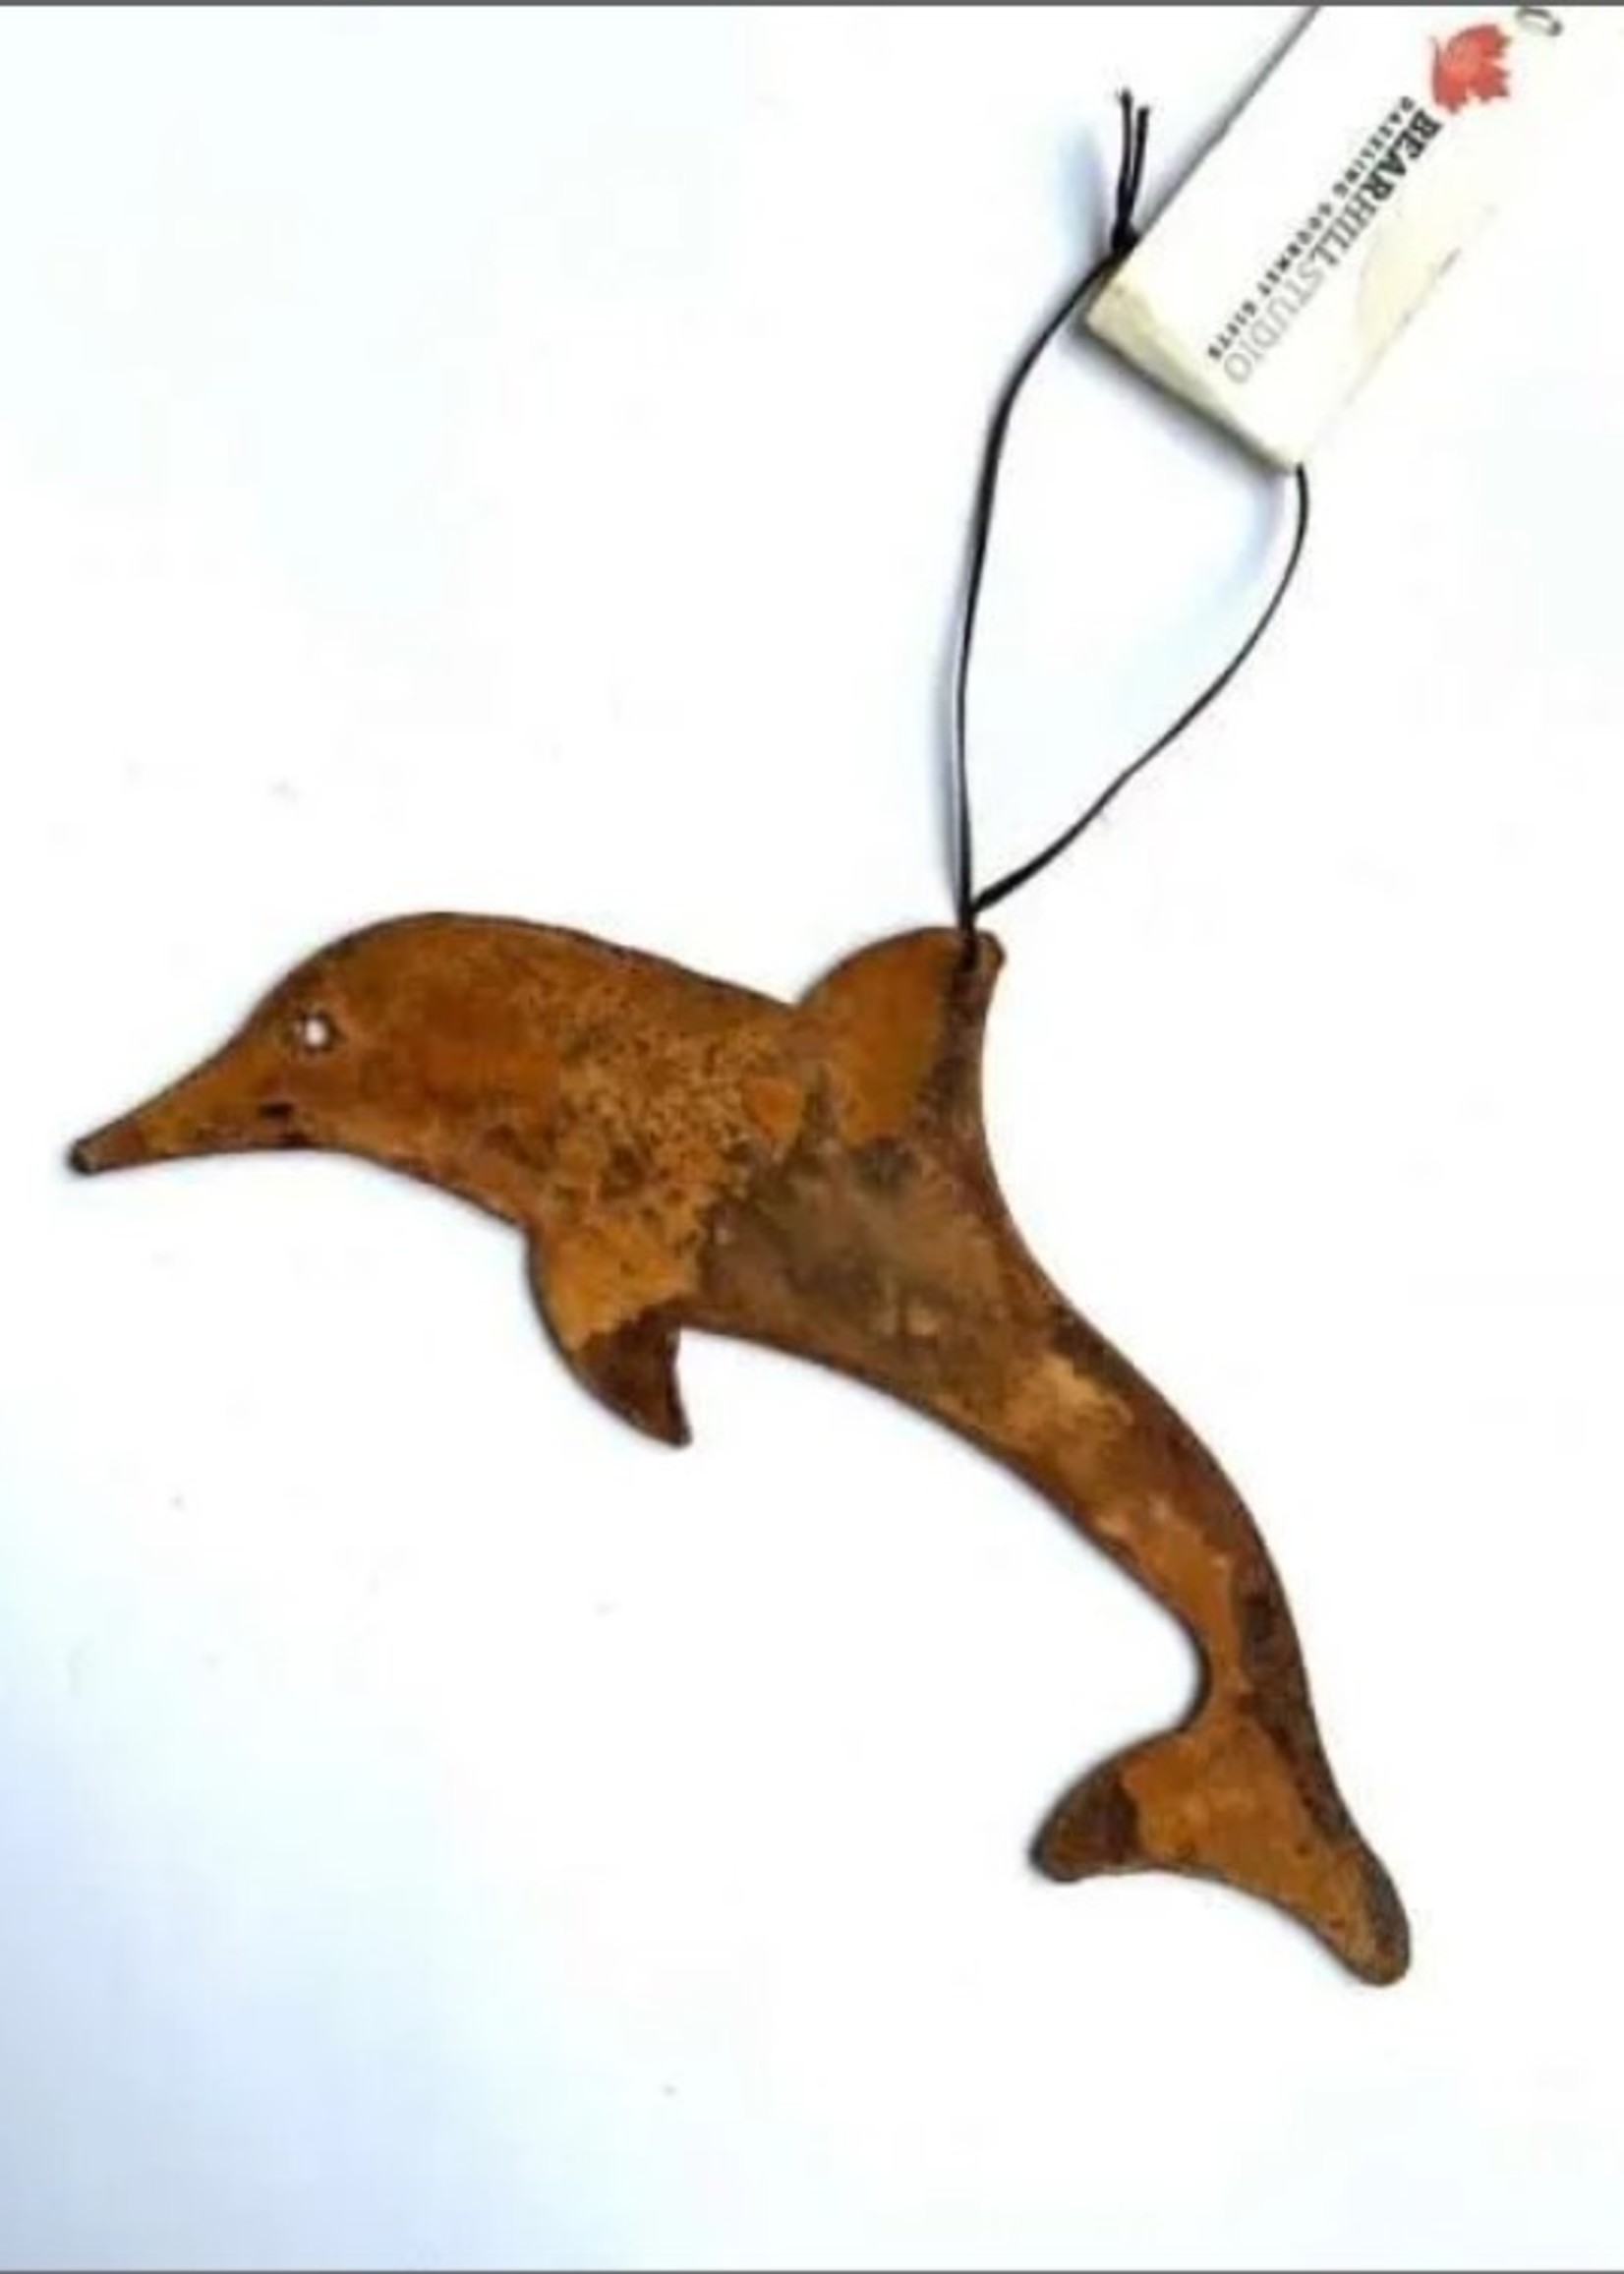 Hanging Metal Ornament * Rusted Metal * Dolphin * In or Outdoors